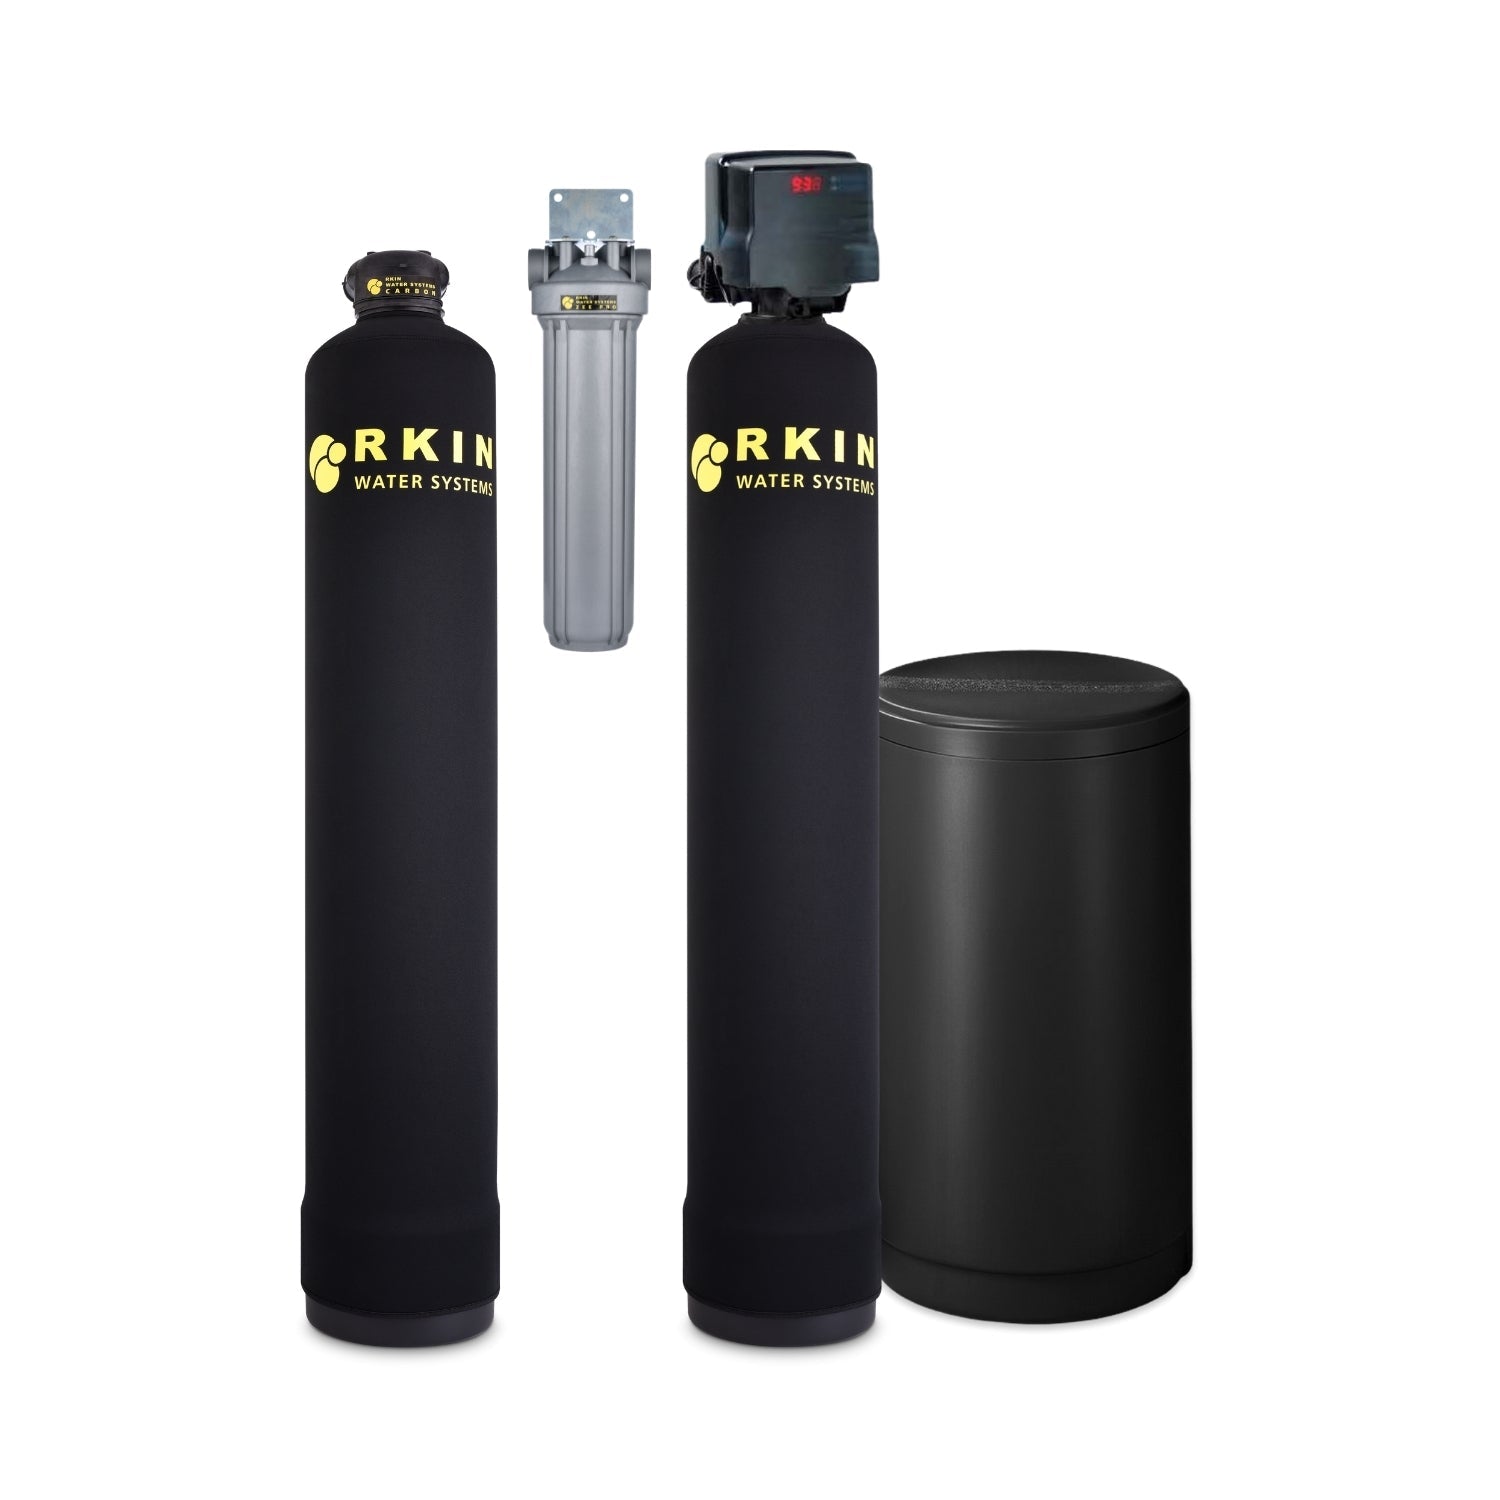 Salt Based Water Softener and Whole House Carbon Filter System from RKIN